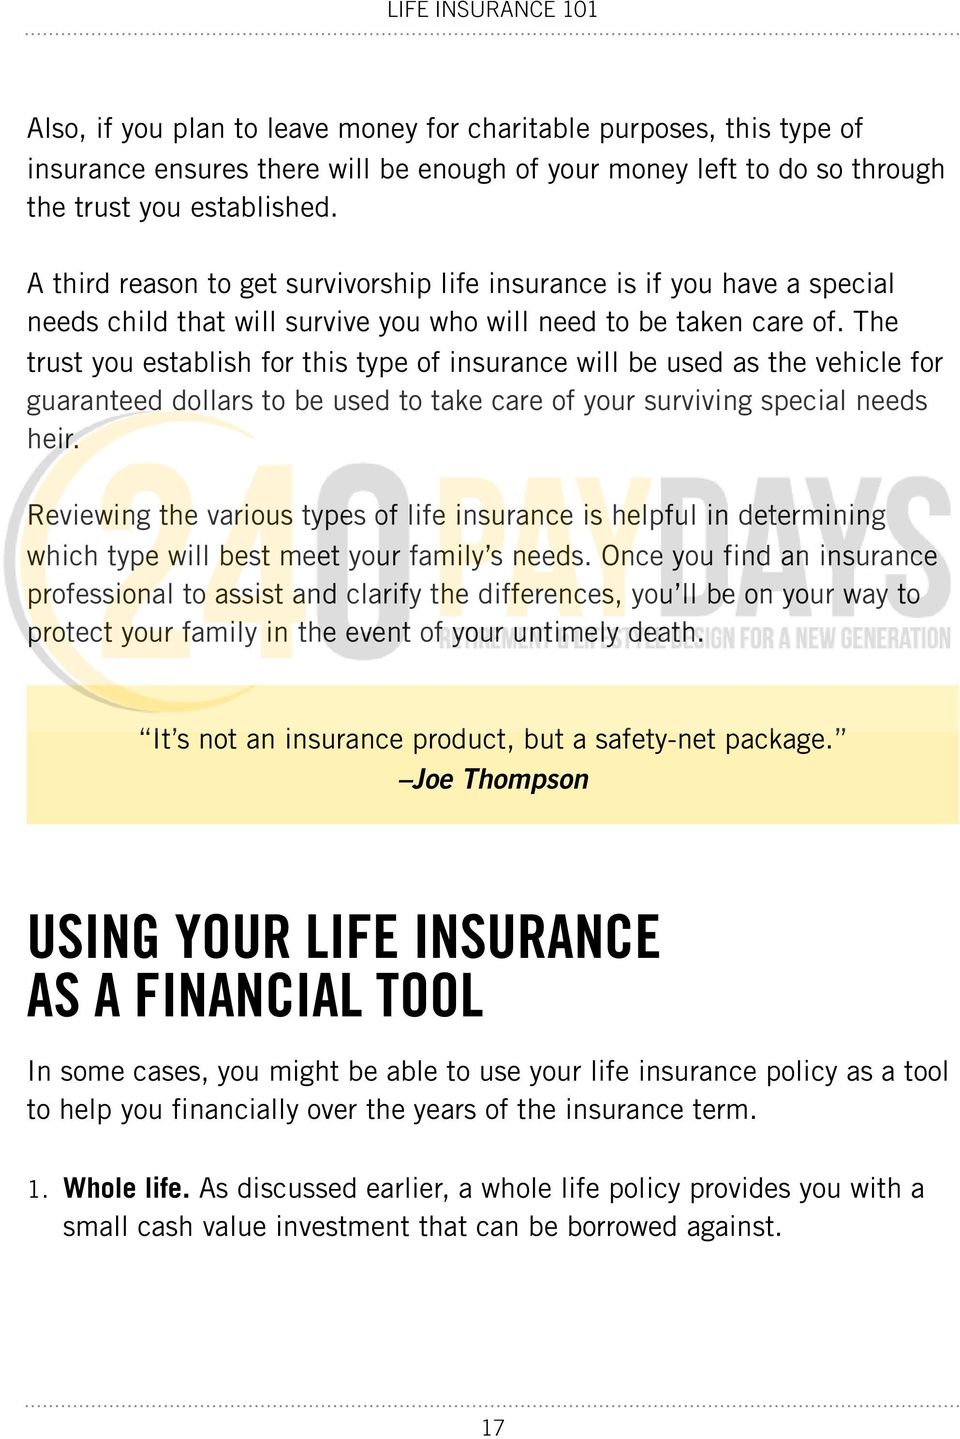 The trust you establish for this type of insurance will be used as the vehicle for guaranteed dollars to be used to take care of your surviving special needs heir.